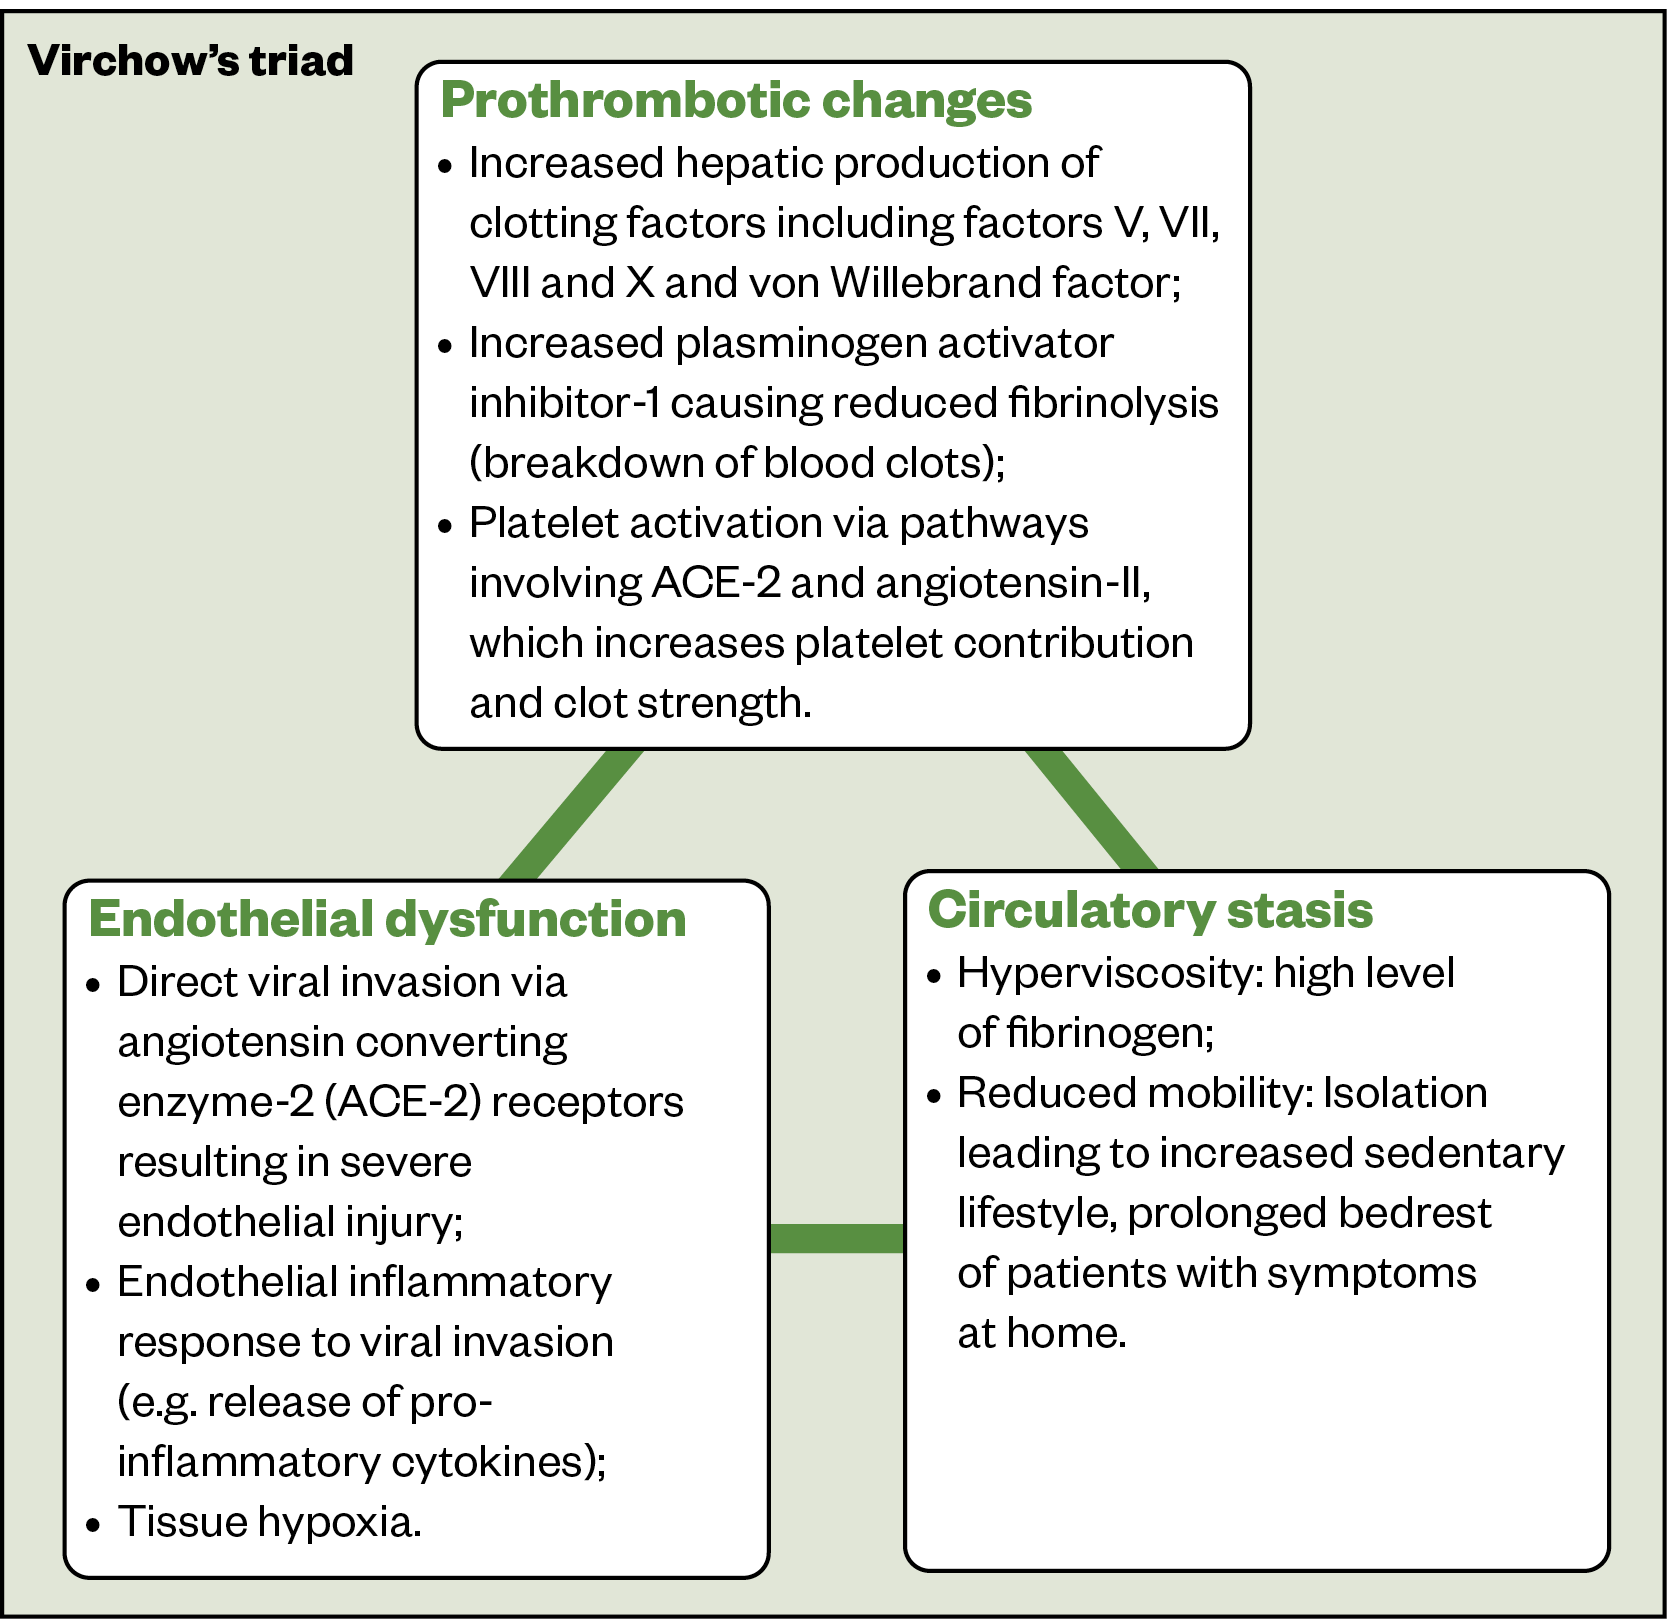 Figure 1: COVID-19 thrombogenic factors categorised according to the Virchow’s triad